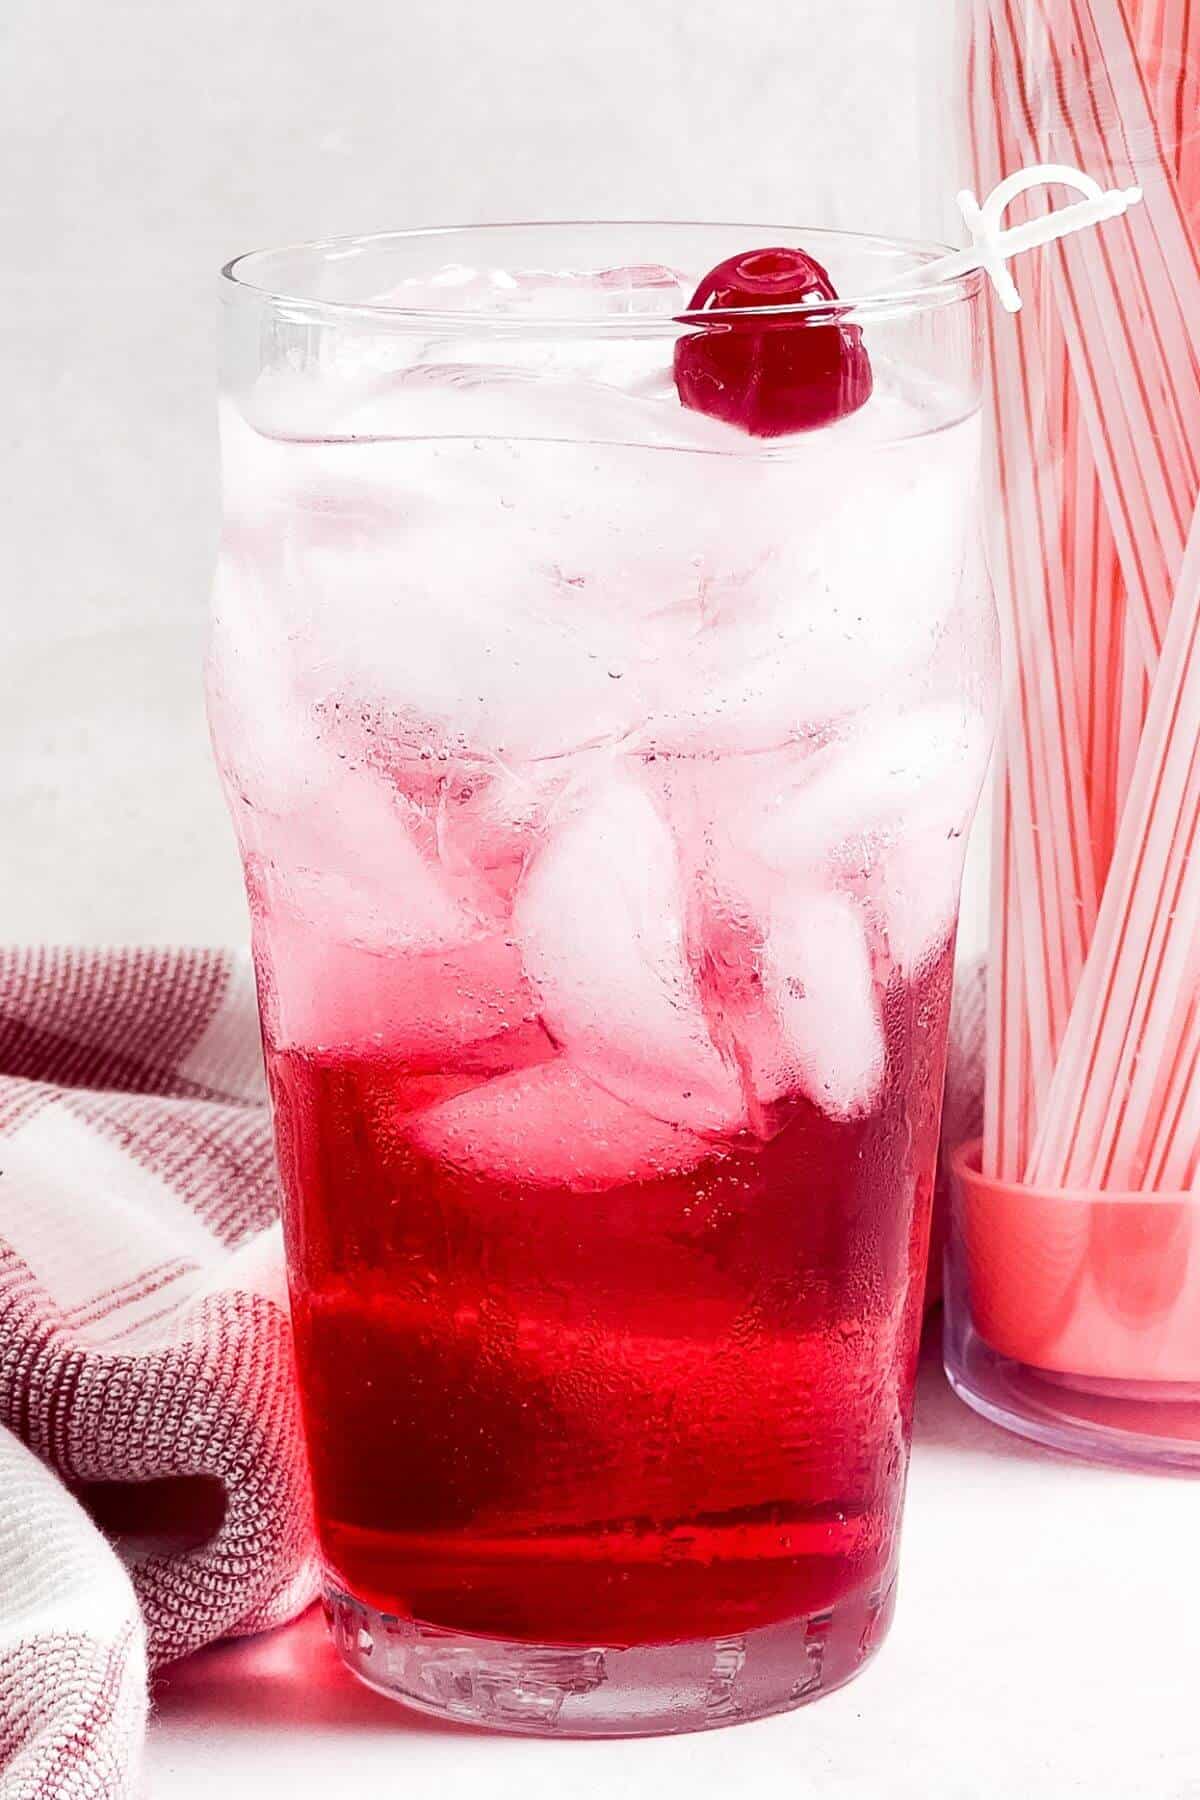 Maraschino cherry added to top of Shirley Temple drink.